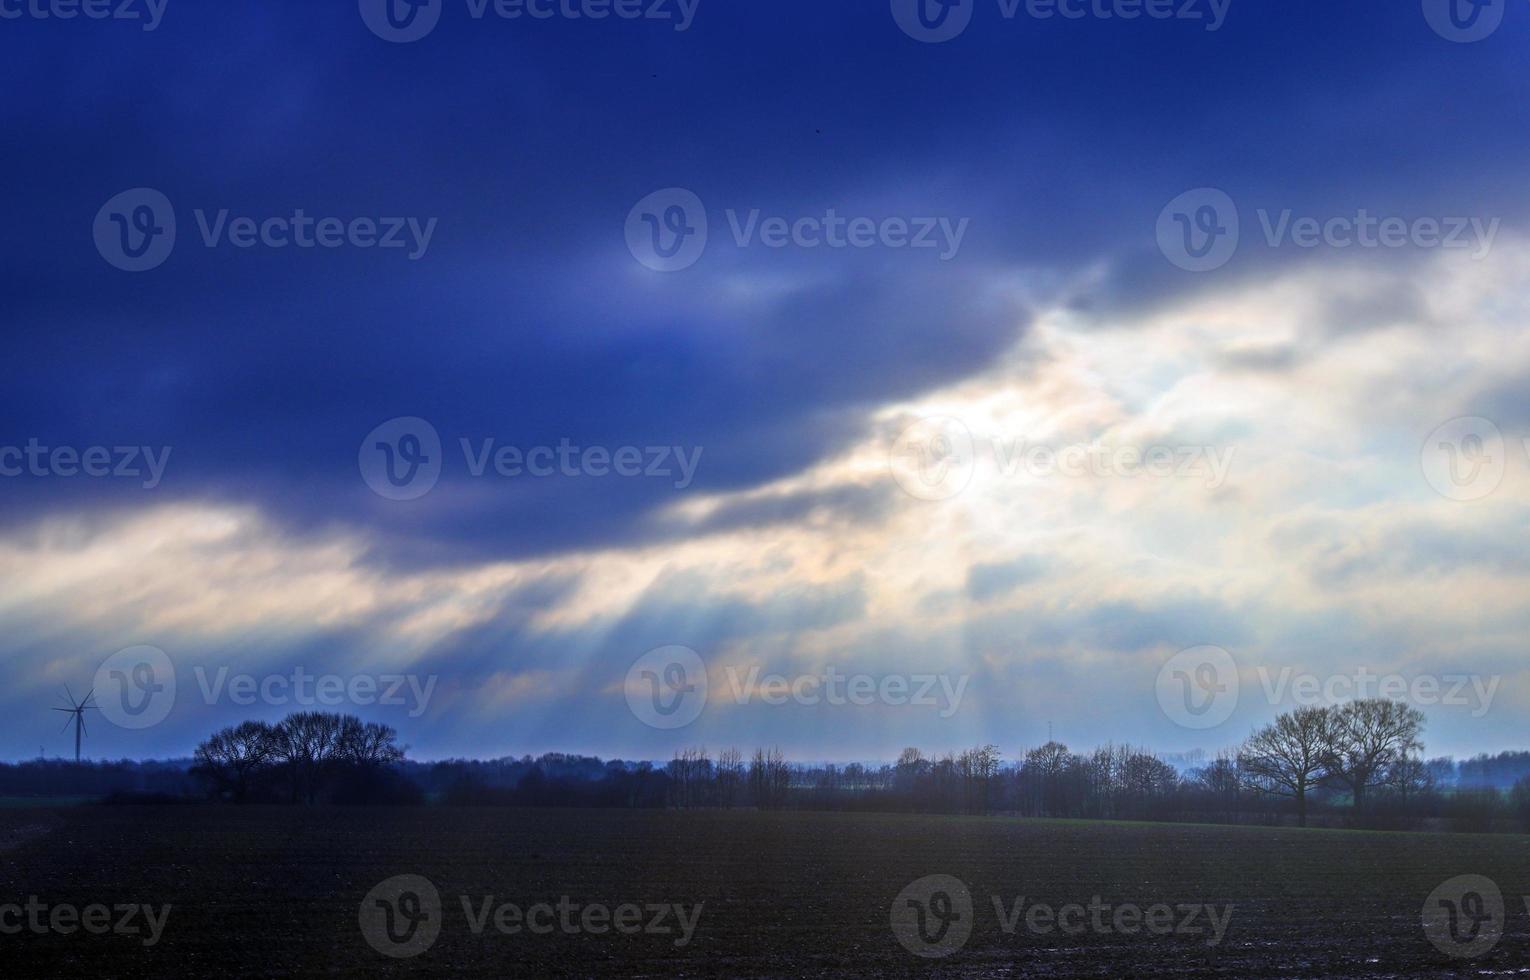 Beautiful view at sunbeams with some lens flares and clouds in a blue sky photo